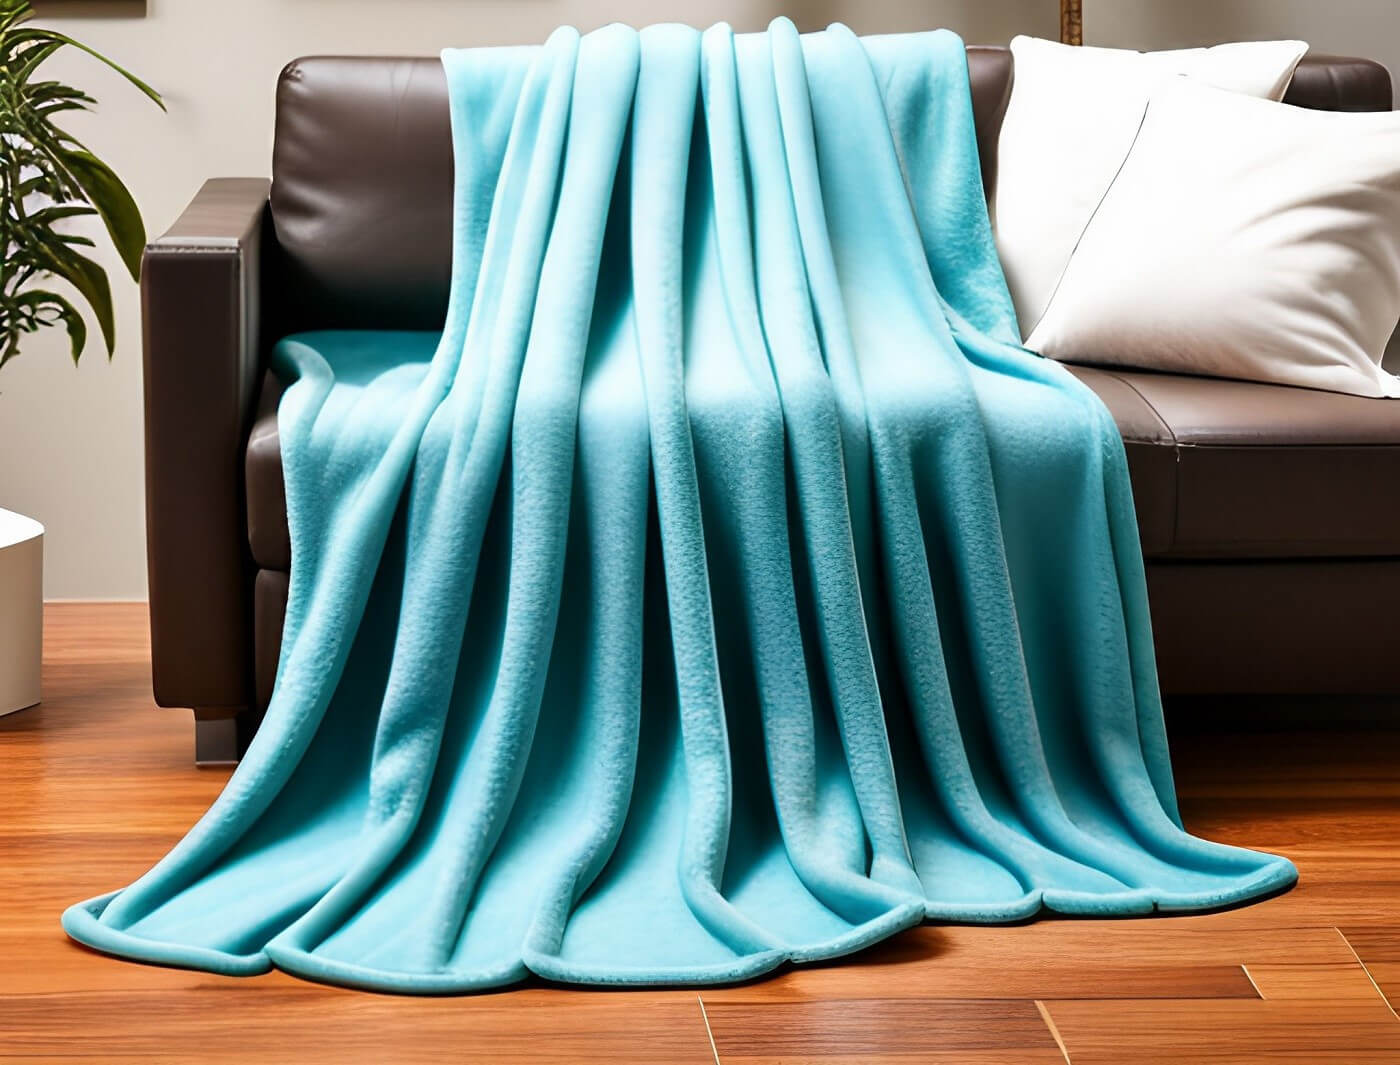 Superior Ultra-Plush Fleece Blankets, Thick, Cozy and Warm Premium Quality  Fleece, Velvety Soft Bed Blankets and Throws, King, Turquoise